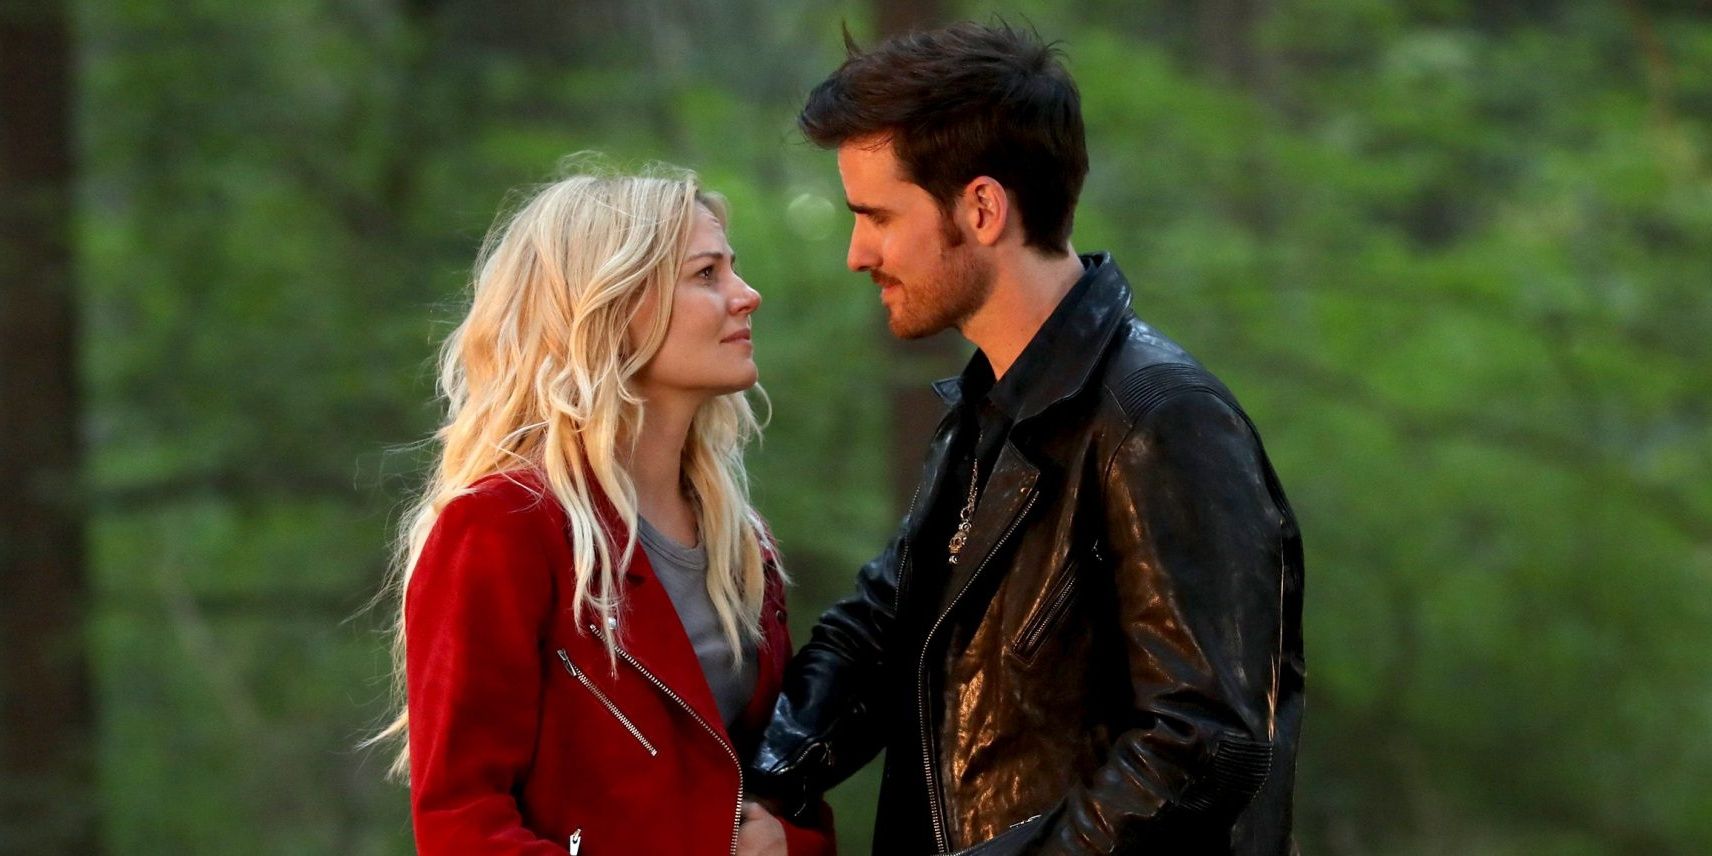 Emma Swan (Jennifer Morrison) and Captain Hook (Colin O'Donoghue) in Once Upon a Time